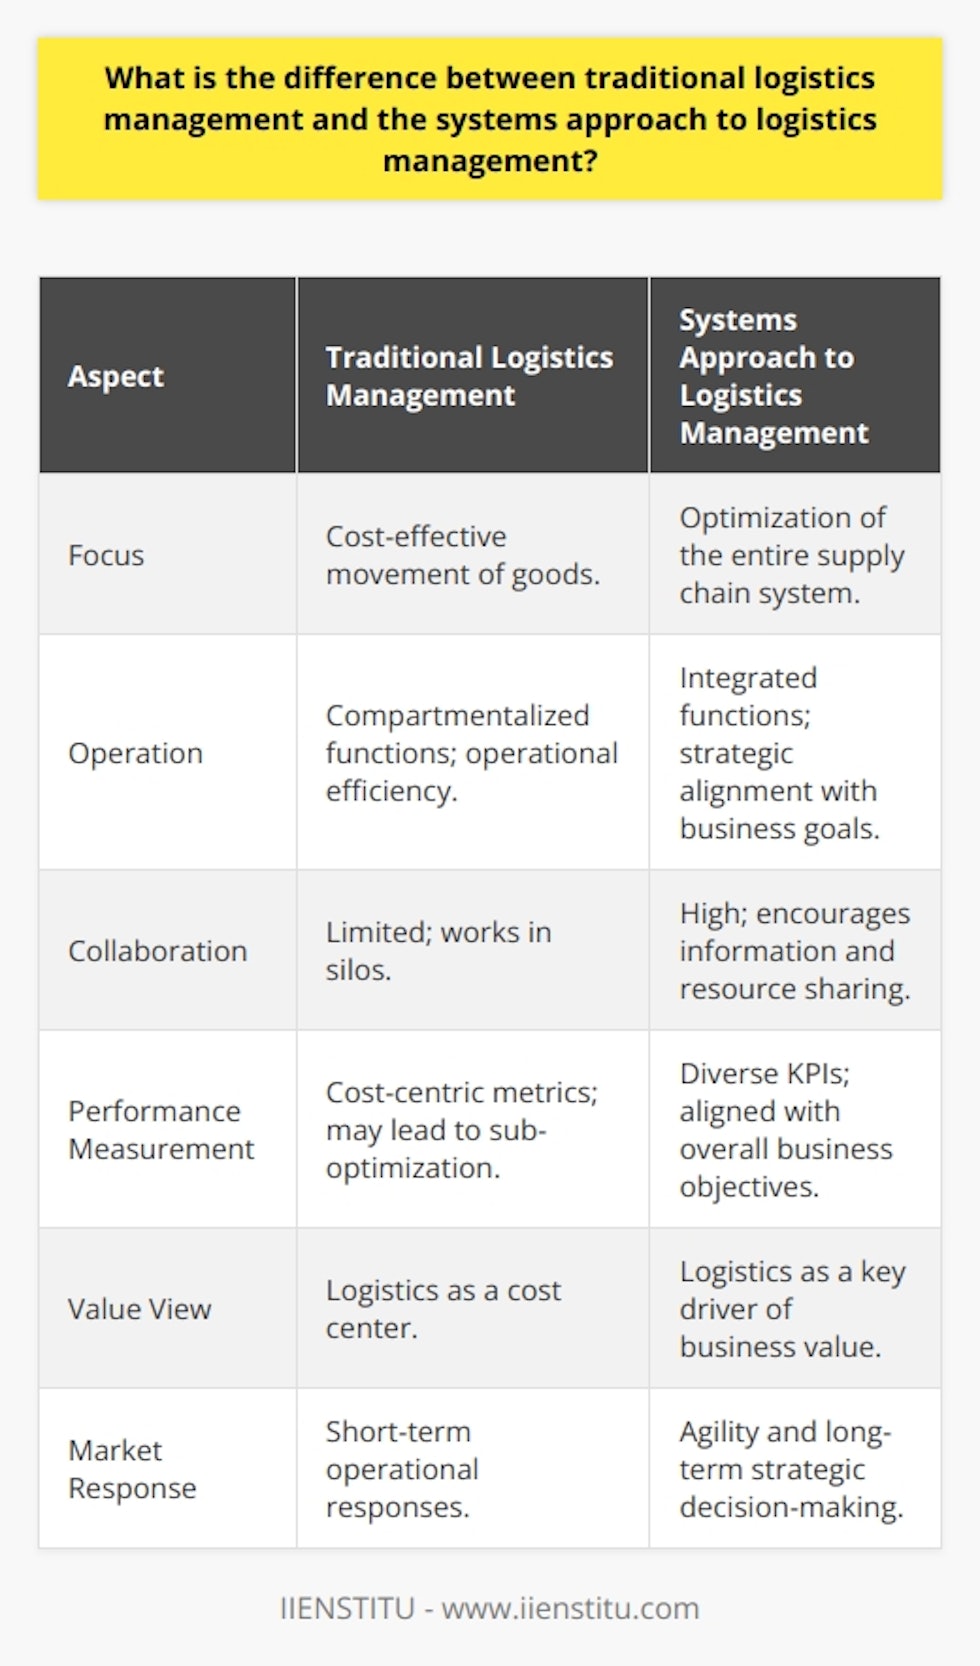 Logistics management is a critical component of supply chain operations, and it has evolved dramatically from traditional practices to a more integrated and strategic systems approach. Understanding the differences between these two models can greatly impact an organization's efficiency and competitiveness.Traditional Logistics Management:Historically, traditional logistics management has been about moving goods in the most cost-effective manner possible. It emphasized compartmentalized functions, looking at discrete parts of the chain like transportation, warehouse management, and inventory control. Each function often operated in a vacuum, concentrating on minimizing its own costs and maximizing its performance without considering the larger picture.Implementation in this context focused on the efficient execution of tasks at the lowest possible operational cost. However, this approach could lead to sub-optimization, where one component of the supply chain was optimized at the expense of others. Hence, while a traditional management might reduce transportation costs by consolidating shipments, it could inadvertently increase inventory holding costs, negating any realized savings.Systems Approach to Logistics Management:The systems approach to logistics management brings a paradigm shift. This approach recognizes that the supply chain is a complex and dynamic network of interrelated components, where actions in one area can have significant ripple effects across the entire system. It seeks to understand and optimize the whole system rather than individual parts.In a systems approach, coordination and integration are paramount. Organizations adopting this model work collaboratively with suppliers, manufacturers, and customers to streamline processes and enhance transparency throughout the chain. It is a strategic view that recognizes logistics as a key driver of business value, not just a cost center.The focus shifts from individual cost savings to overall value creation, customer satisfaction, and market responsiveness. Performance assessment under this approach isn't just about measuring cost efficiency but also about how logistics contributes to achieving broader business goals. Feedback loops are crucial, often leveraging sophisticated technologies to continuously capture data, analyze performance, and refine strategies.Key Distinctions:- Integration and Collaboration: The systems approach fosters a collaborative environment that encourages sharing information and resources across the supply chain, while traditional management often works in silos.- Strategic Focus: Traditional logistics is operational and short-term, whereas the systems approach aligns logistics with long-term business strategies, taking into account the external business environment.- Performance Metrics: The systems approach uses a wide array of KPIs that link logistics performance to overall business objectives, whereas traditional management might use limited metrics focused on cost control.The shift from a traditional to a systems approach in logistics management reflects the increasing complexity of global supply chains and a competitive market that demands agility, efficiency, and customer-centricity. Organizations like IIENSTITU that recognize the importance of an integrated supply chain are better equipped to adapt to changes, meet customer demands, and maintain a competitive edge.